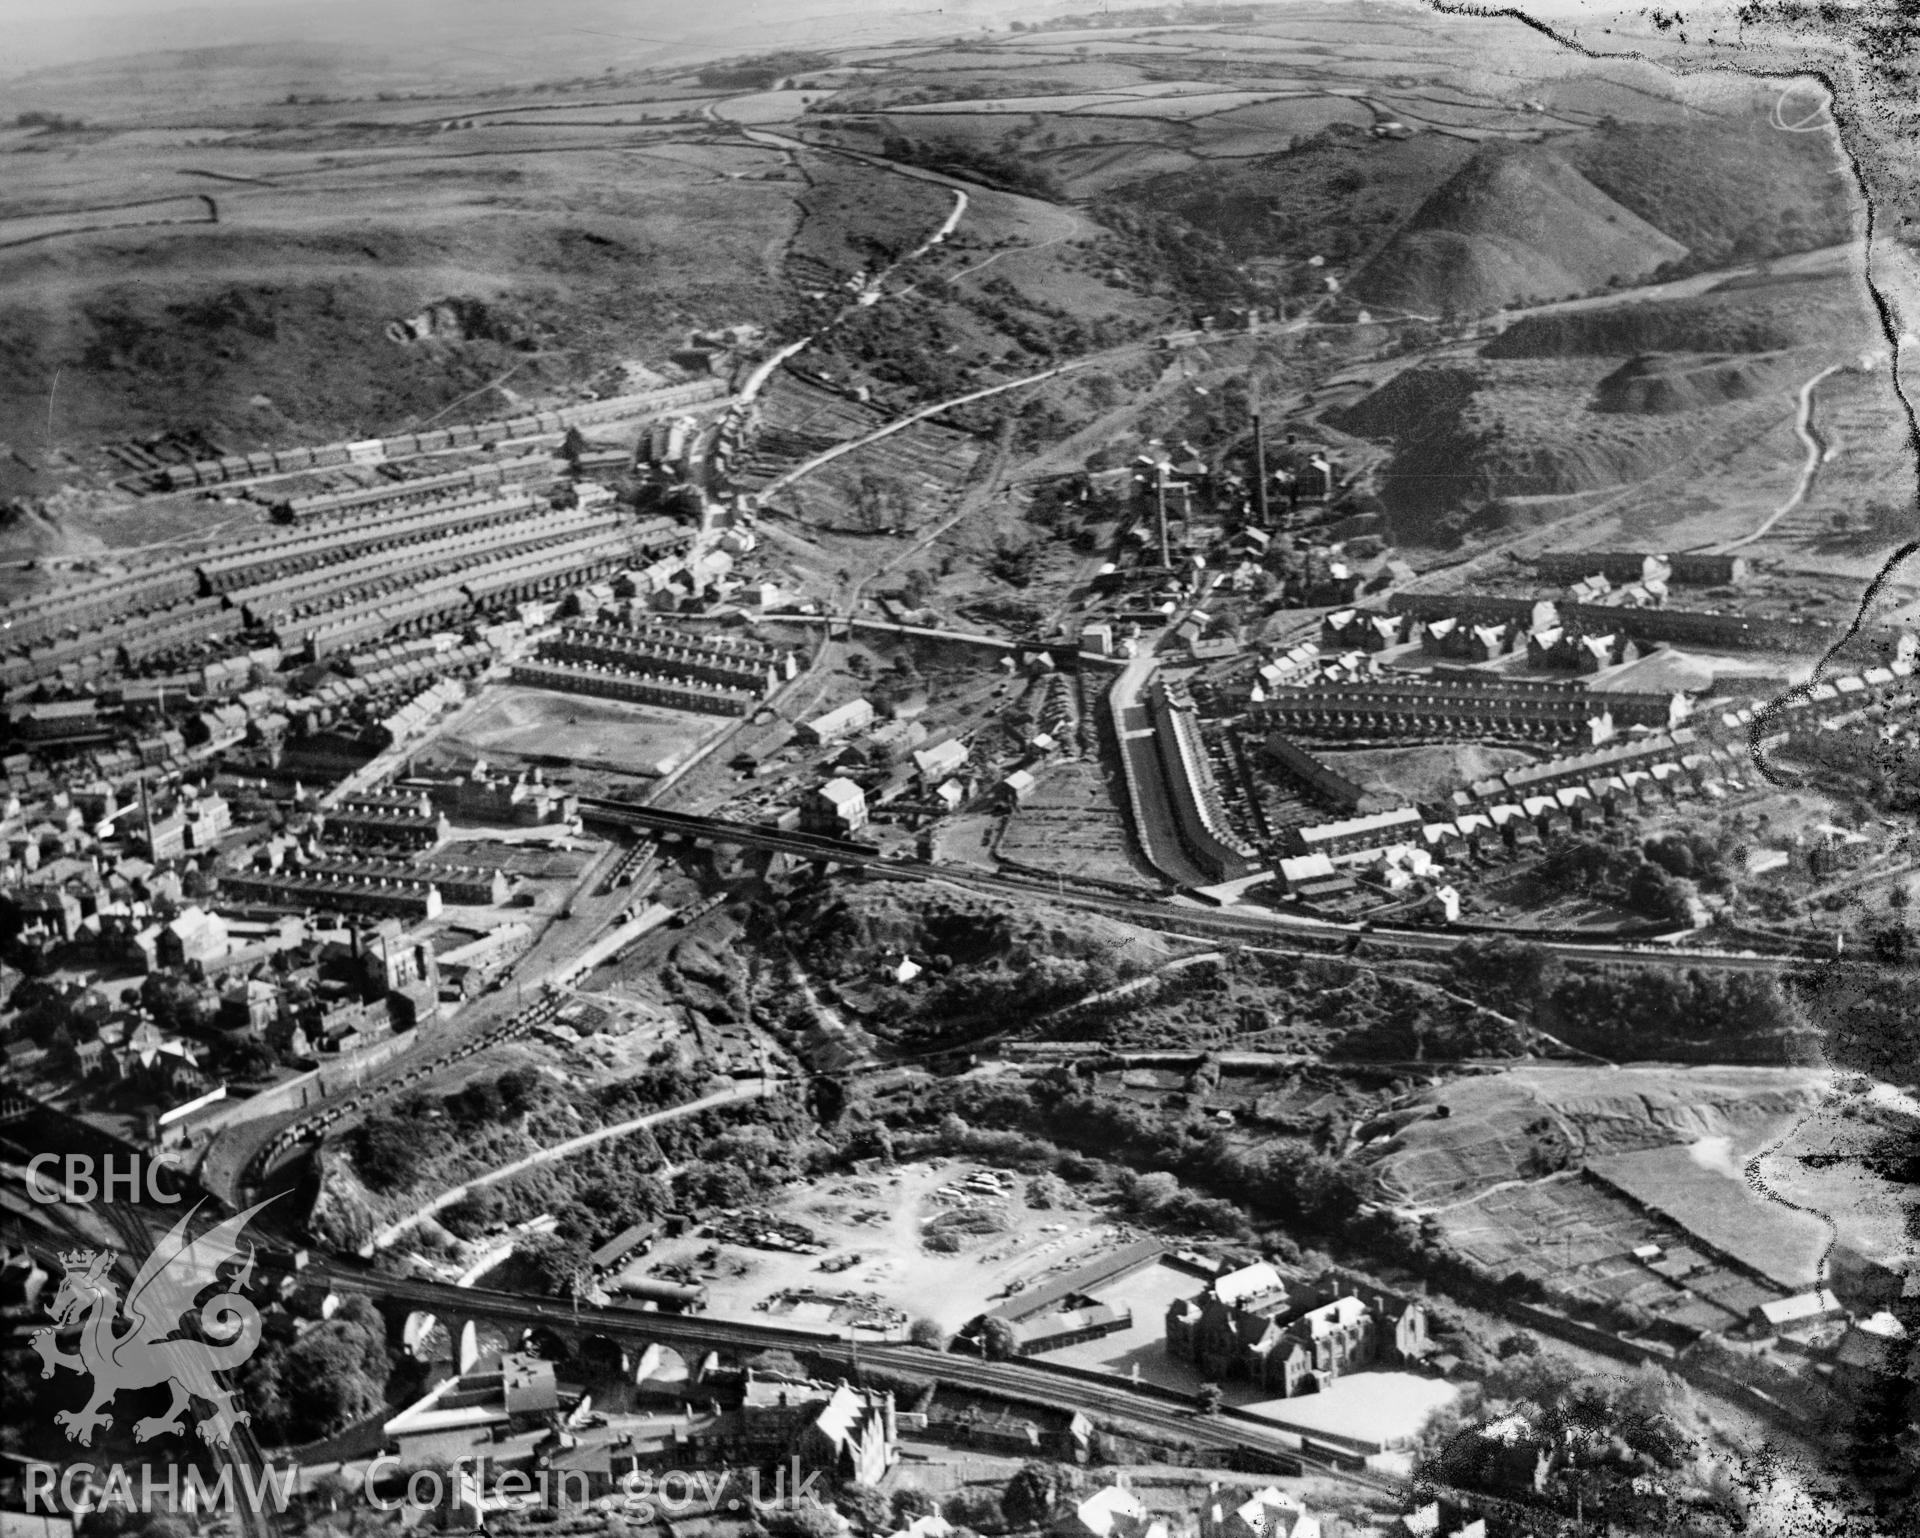 View of Maritime Colliery, Pontypridd, looking from north, oblique aerial view. 5?x4? black and white glass plate negative.